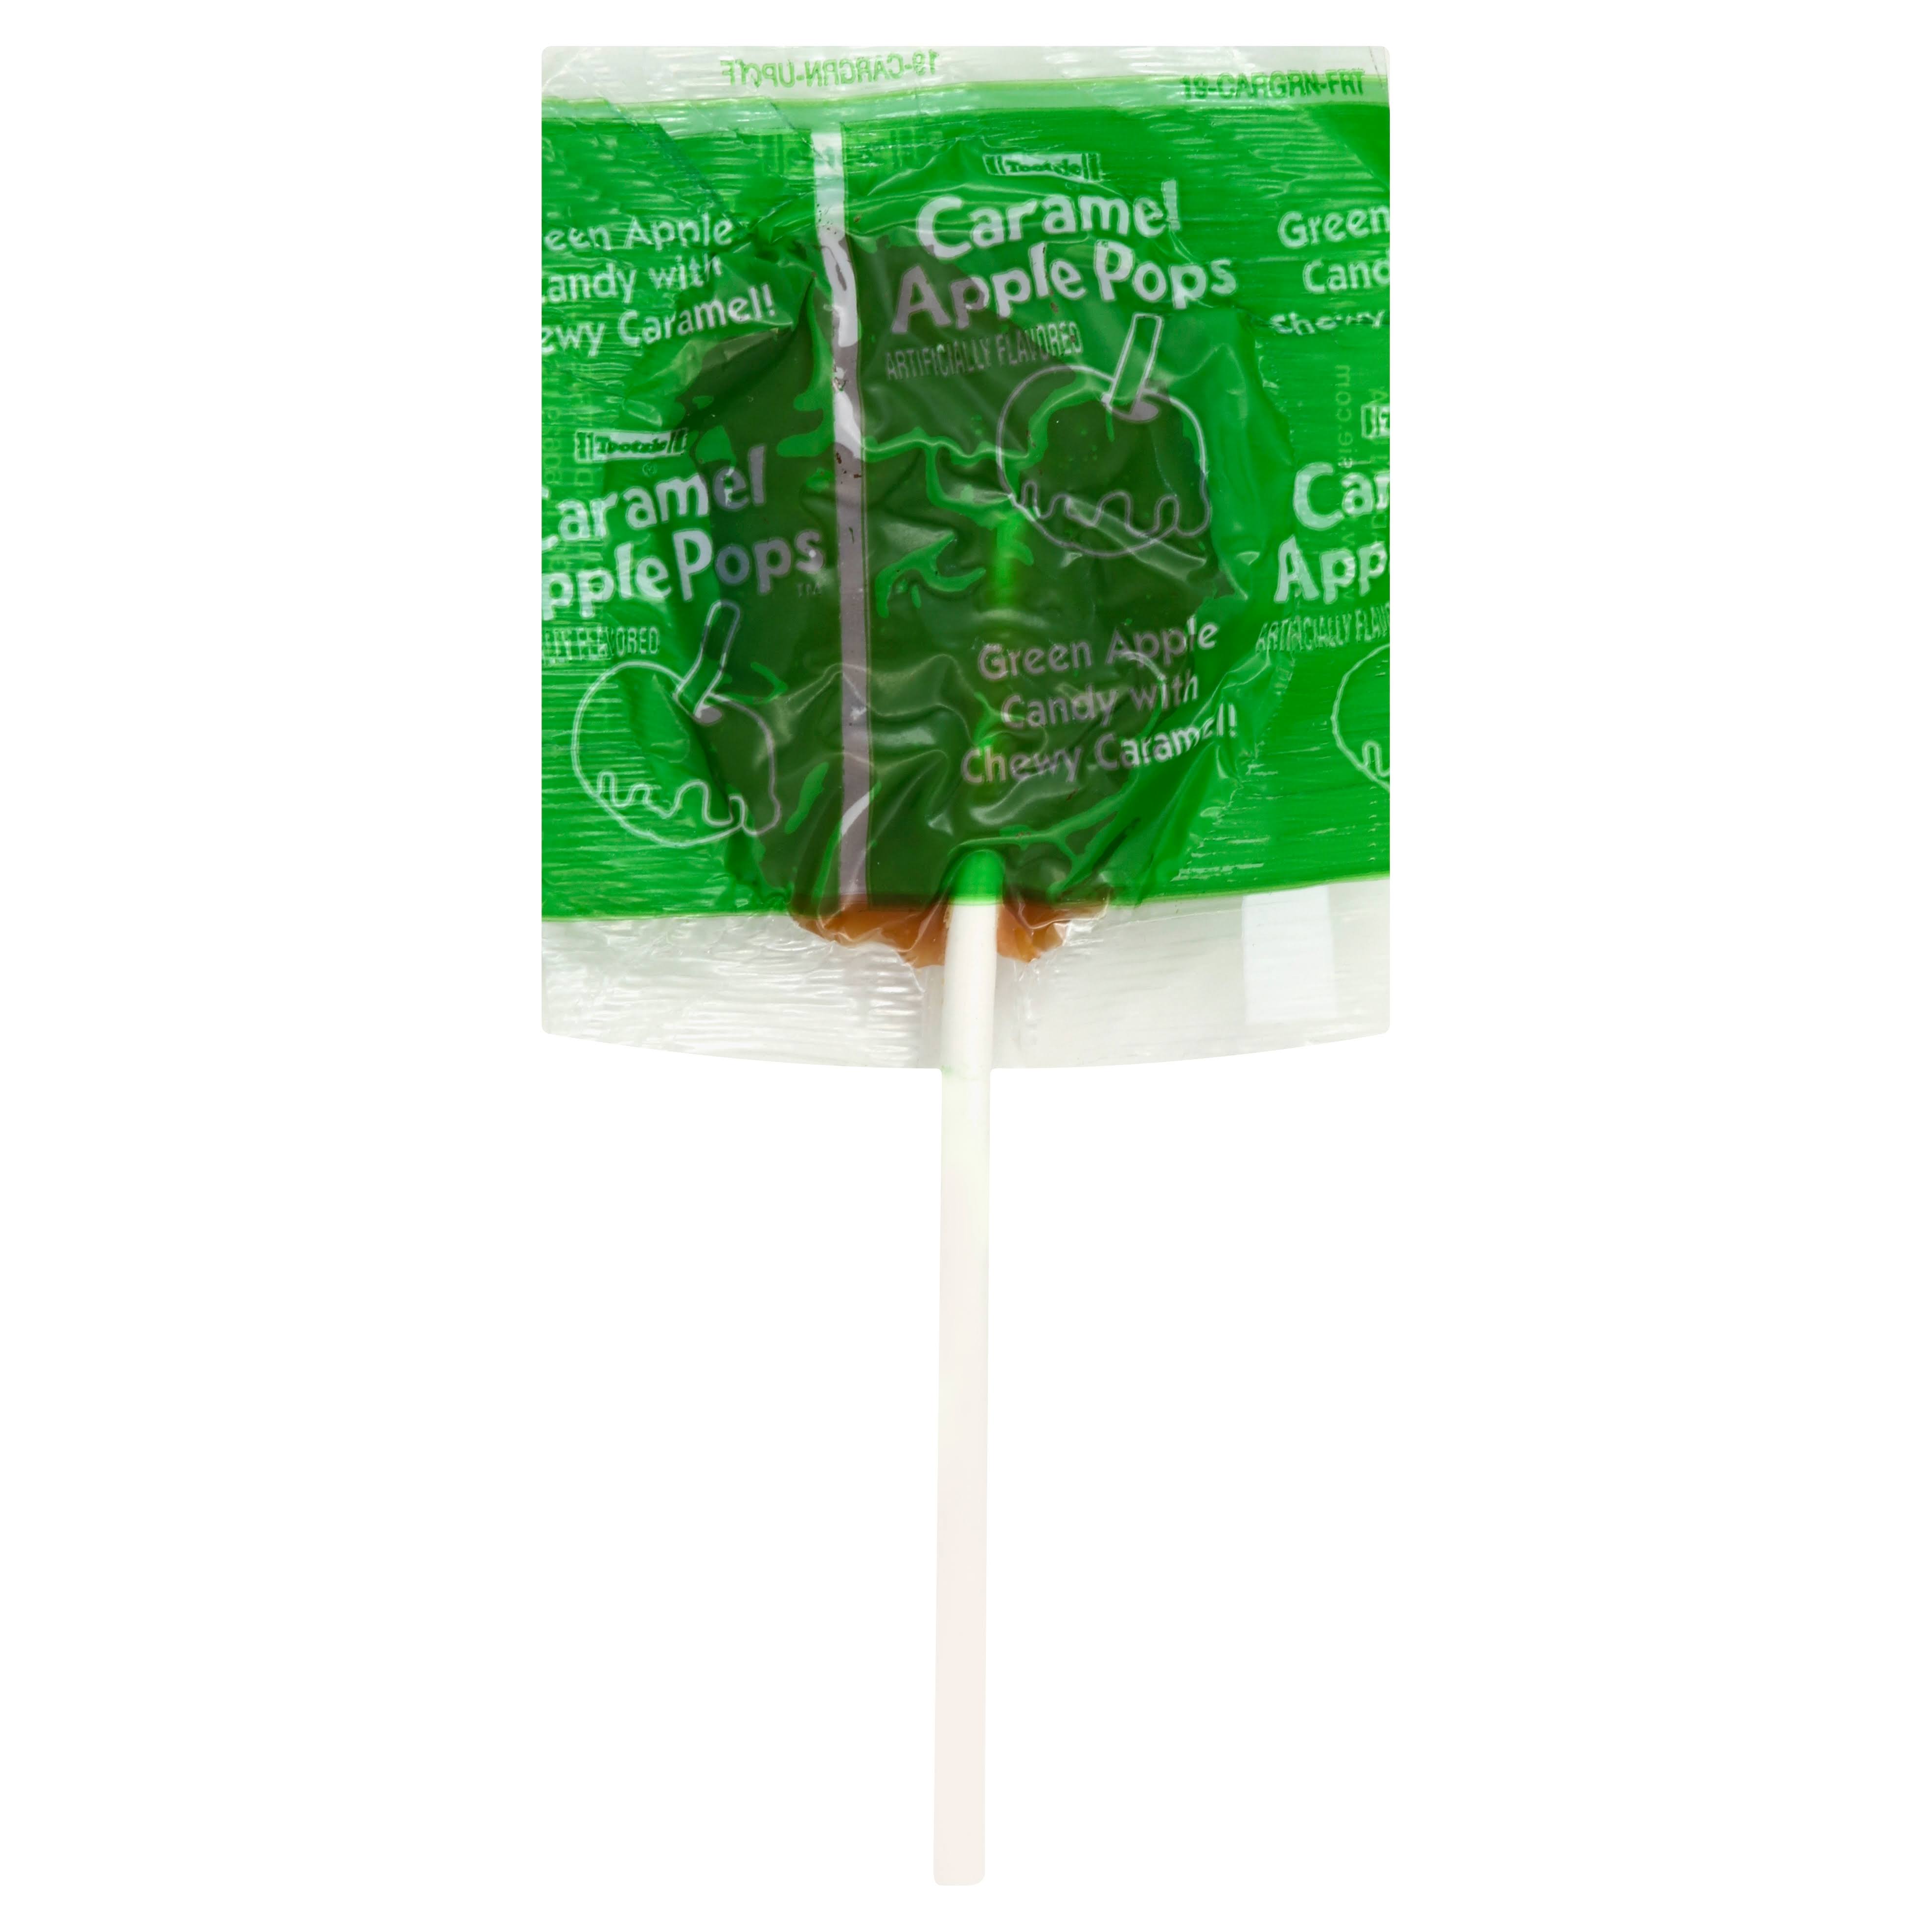 Tootsie Candy Caramel Apple Pops - 48 count